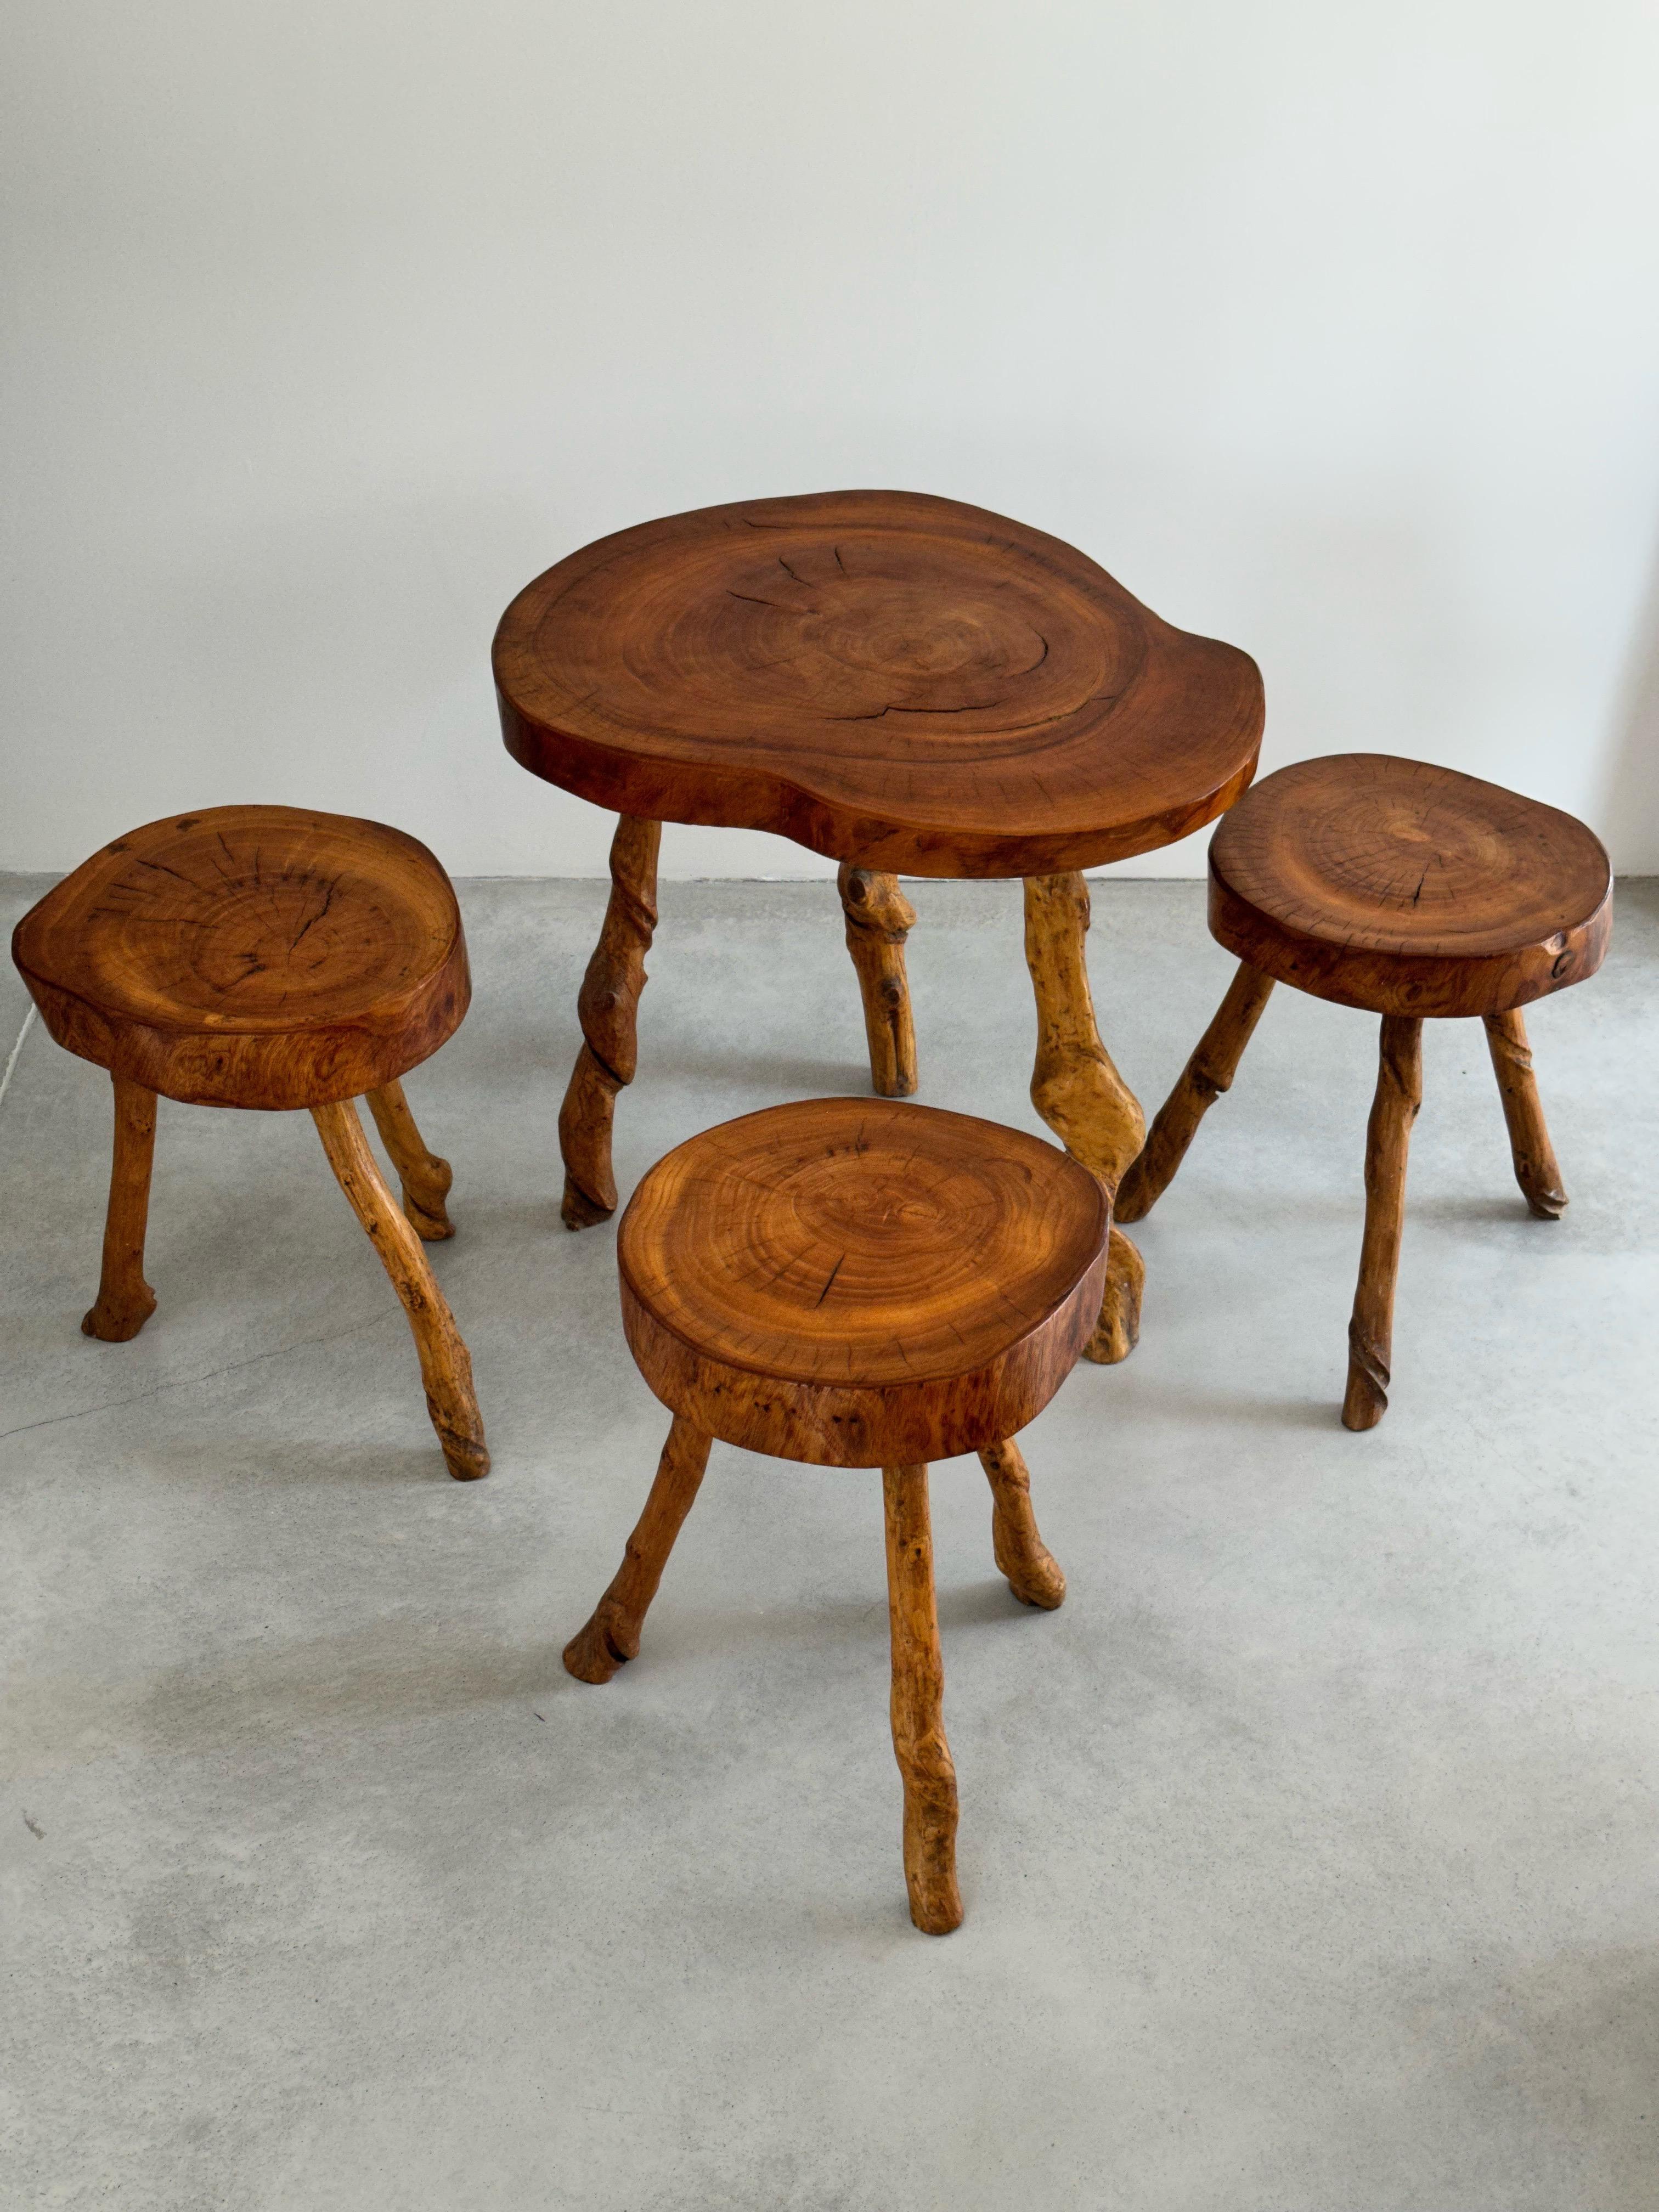 Brutalist Set of 3 Low Stools and 1 Coffee Table, Solid Wood, France, 1960s For Sale 4